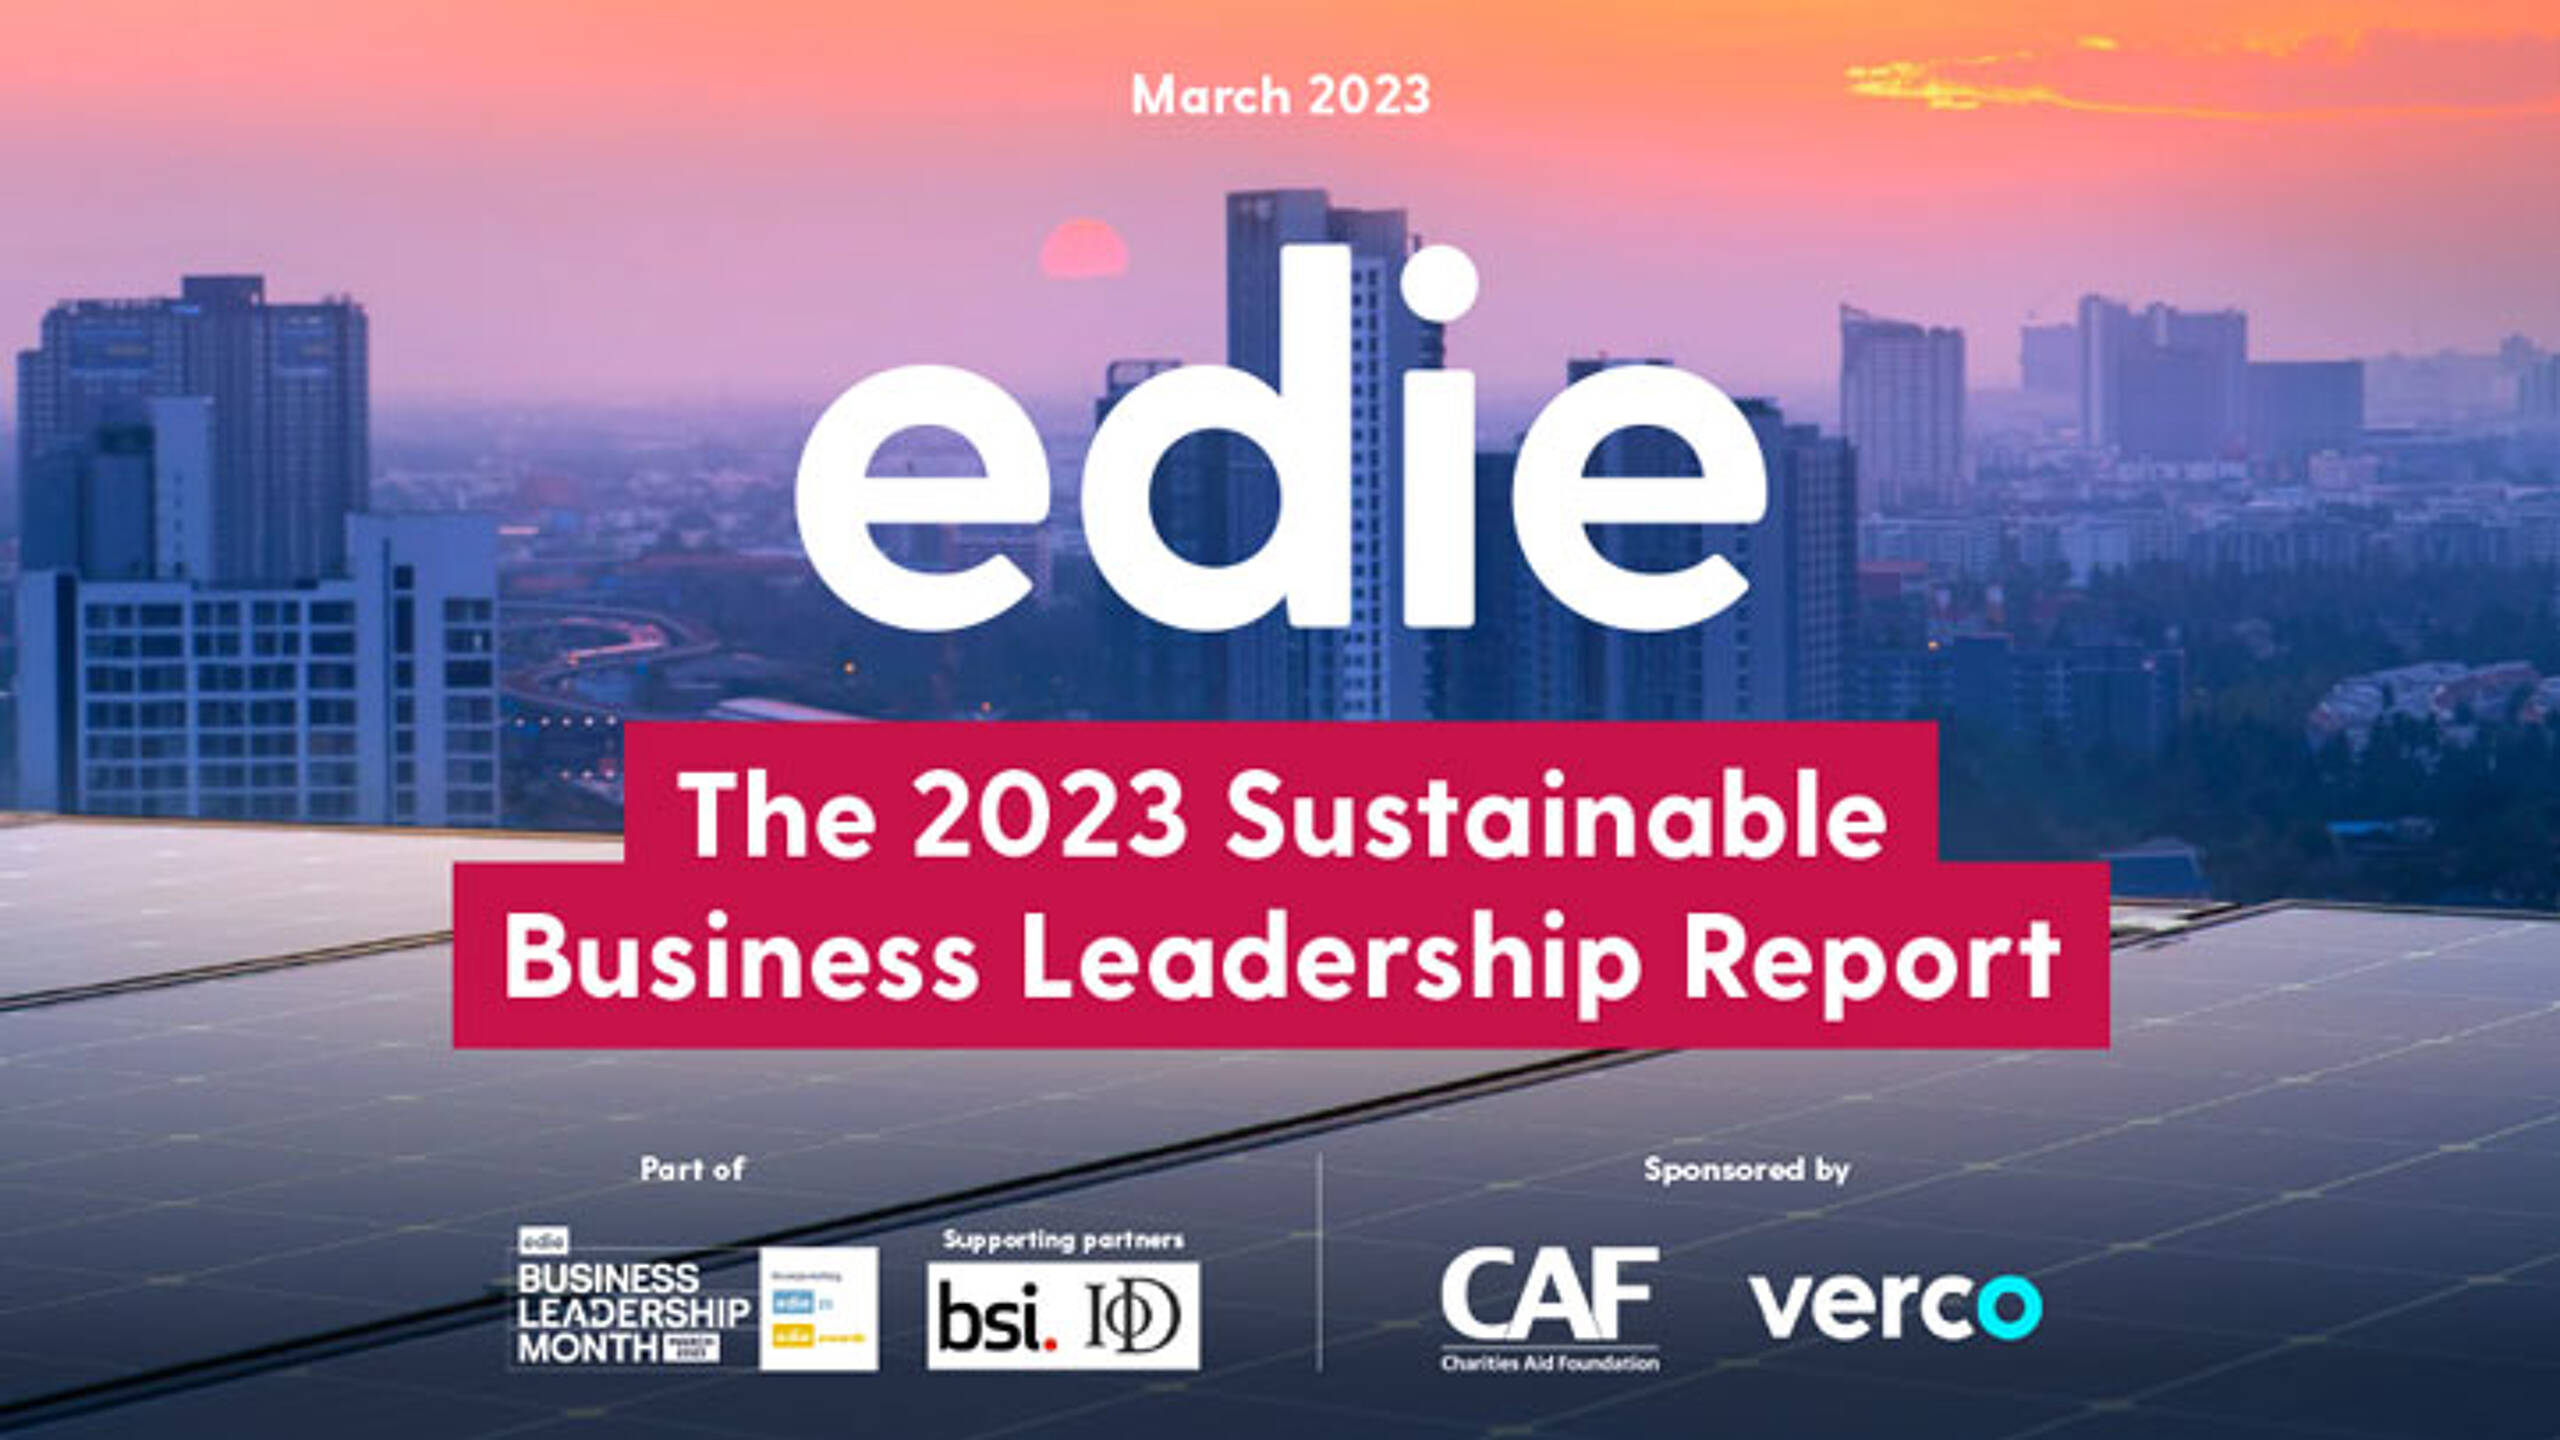 The 2023 Sustainable Business Leadership Report